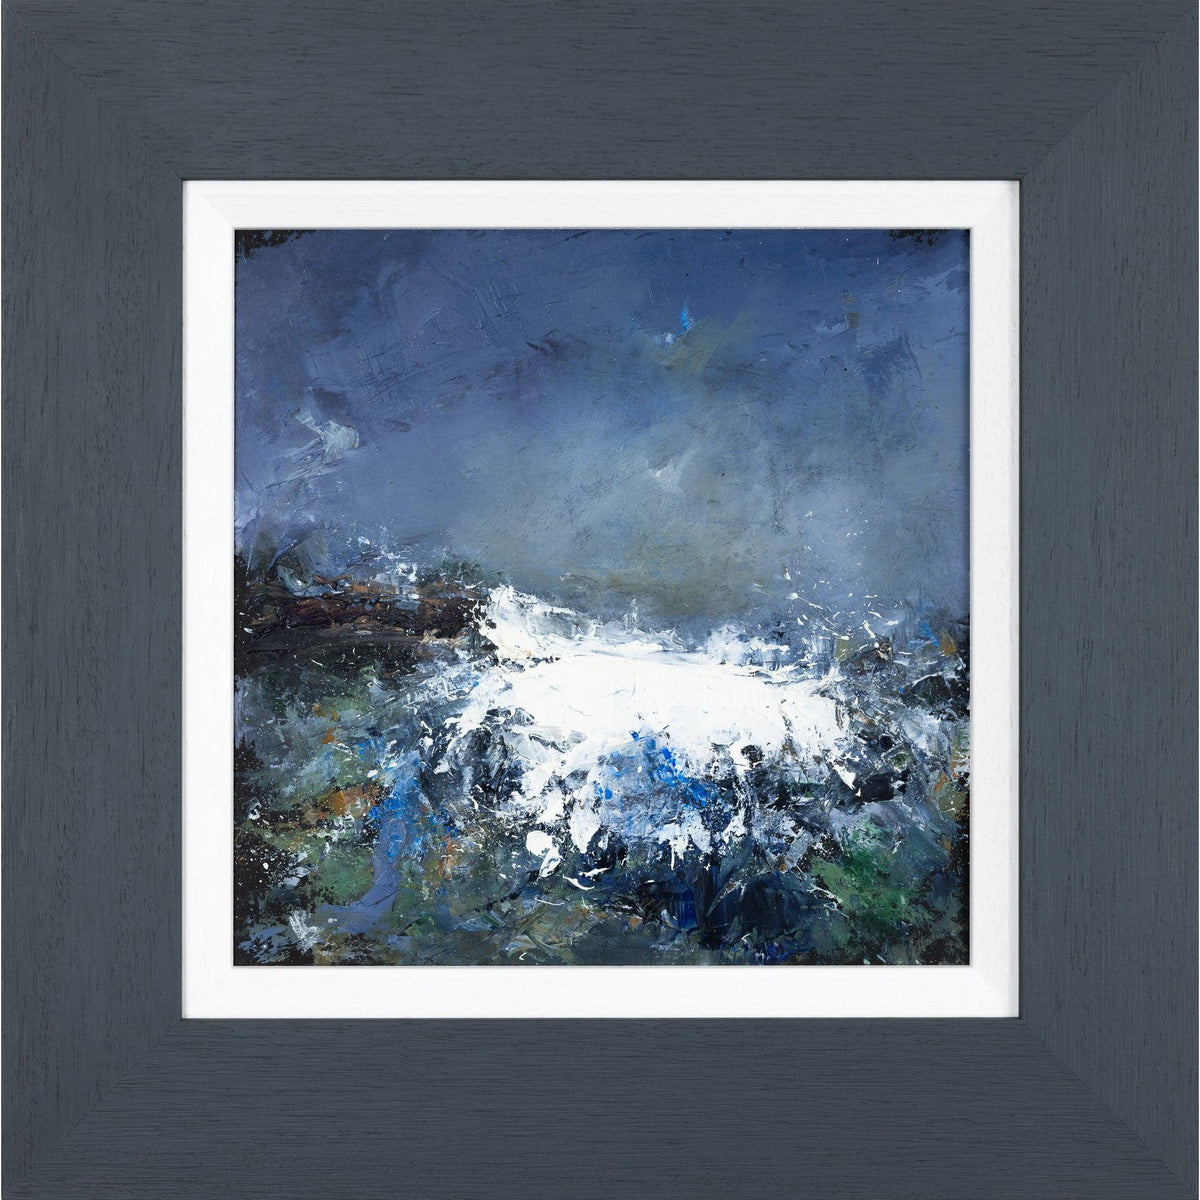 &#39;Wild Waves V&#39; oil on board original by Ian Rawnsley, available at Padstow Gallery, Cornwall